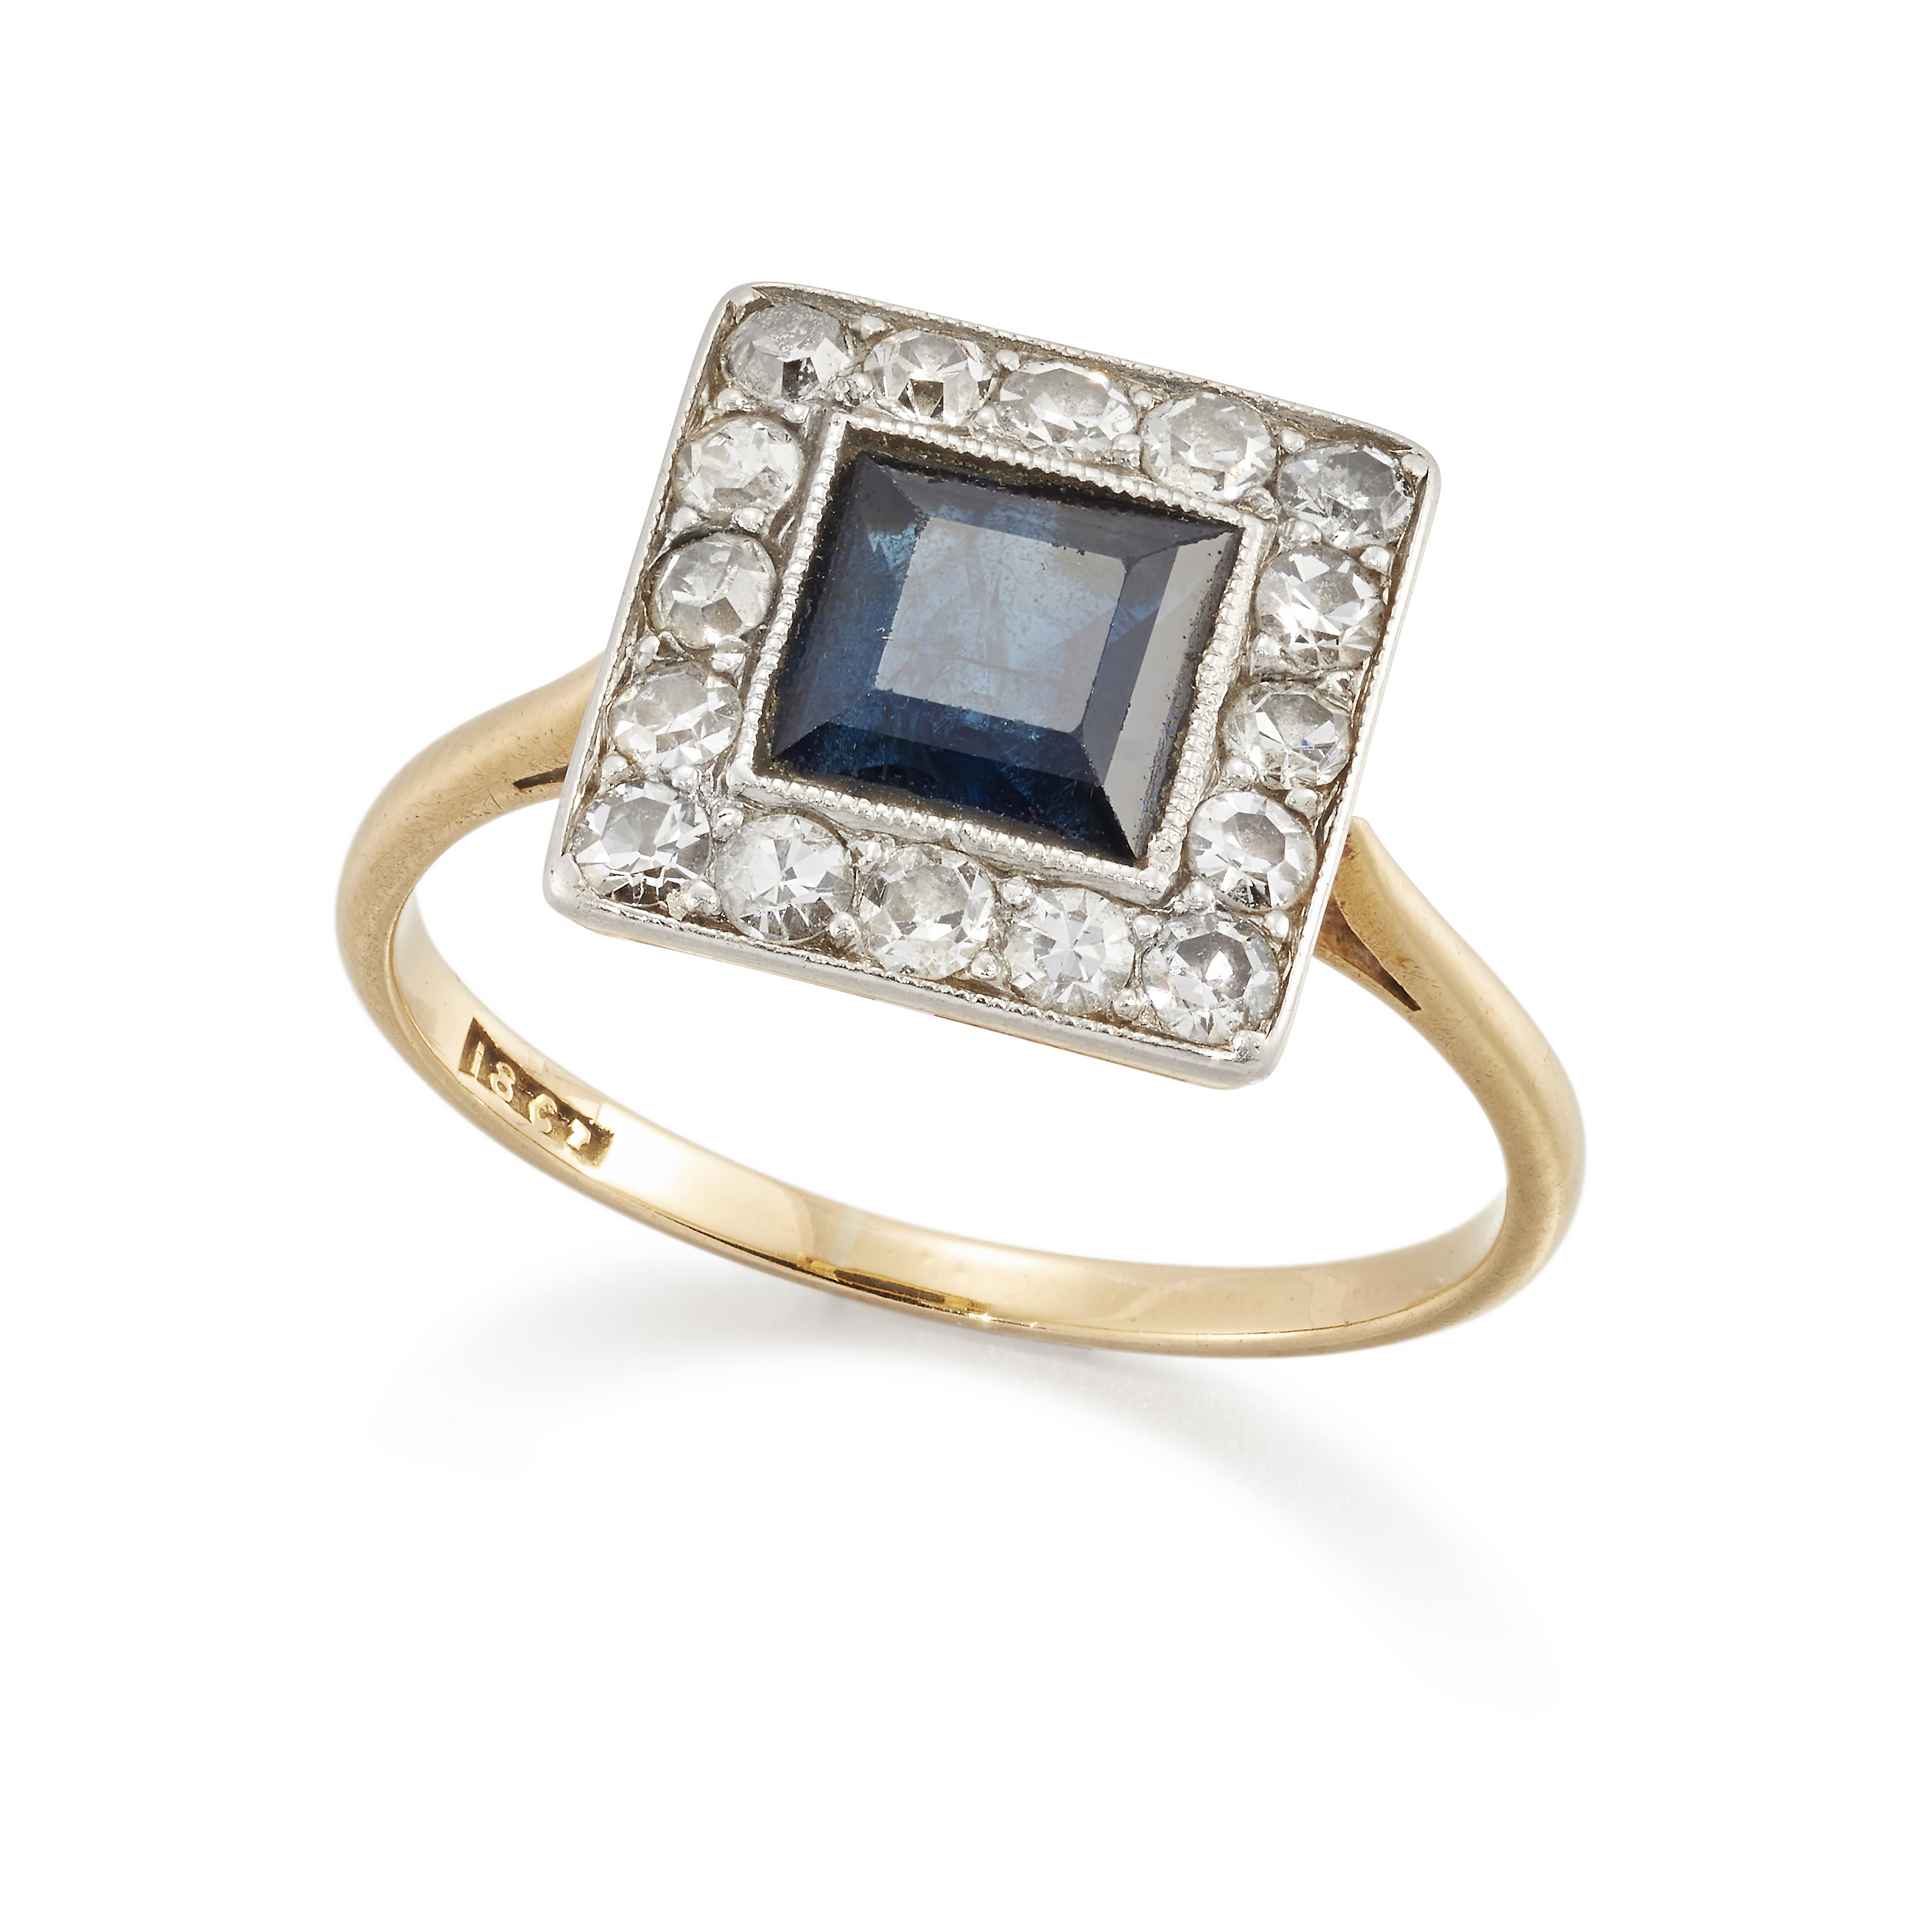 An early 20th century 18ct gold sapphire and diamond cluster ring, with a square step cut sapphir...